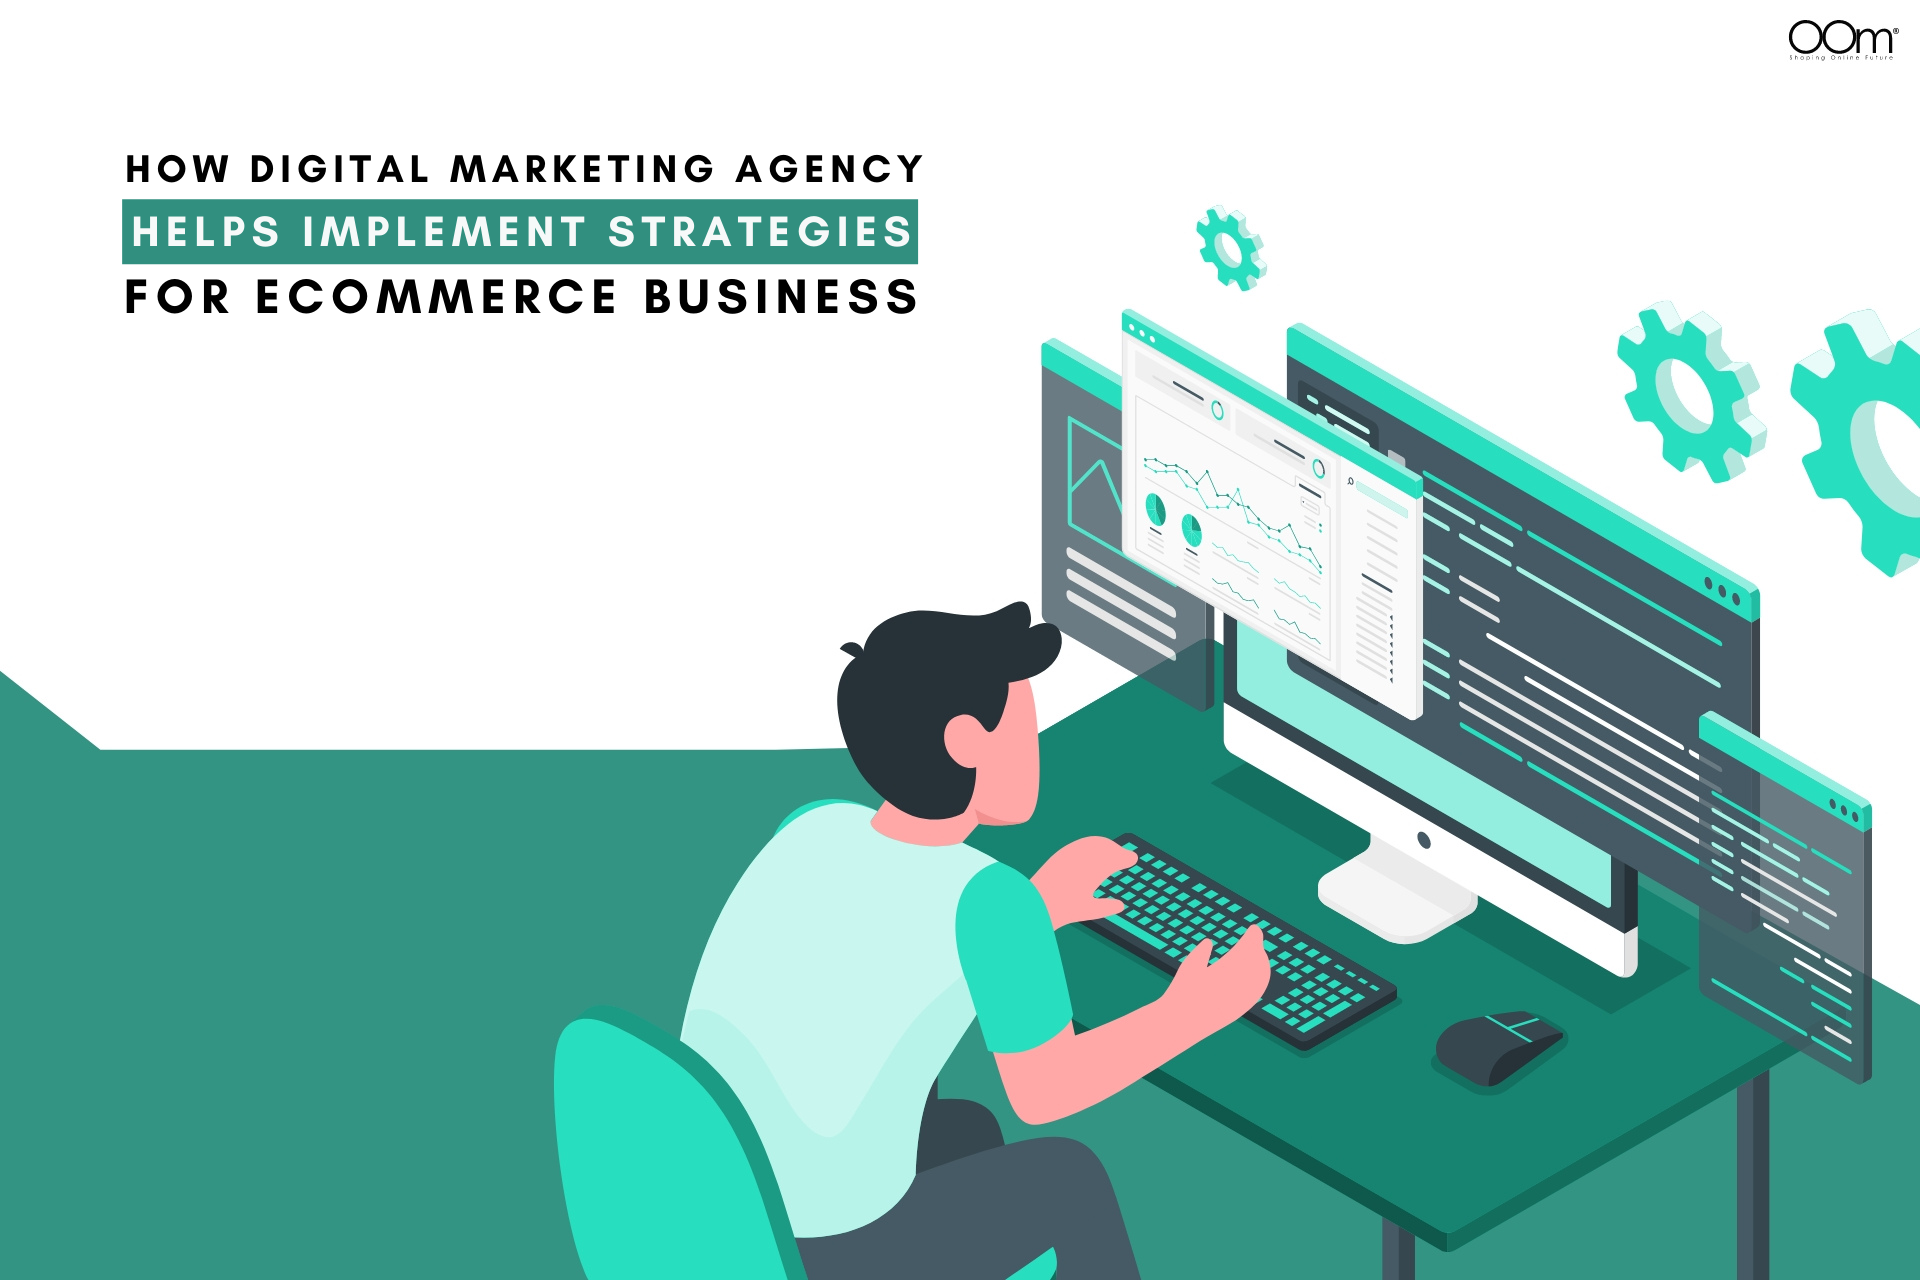 How Digital Marketing Agency Helps Implement Strategies For Ecommerce Business